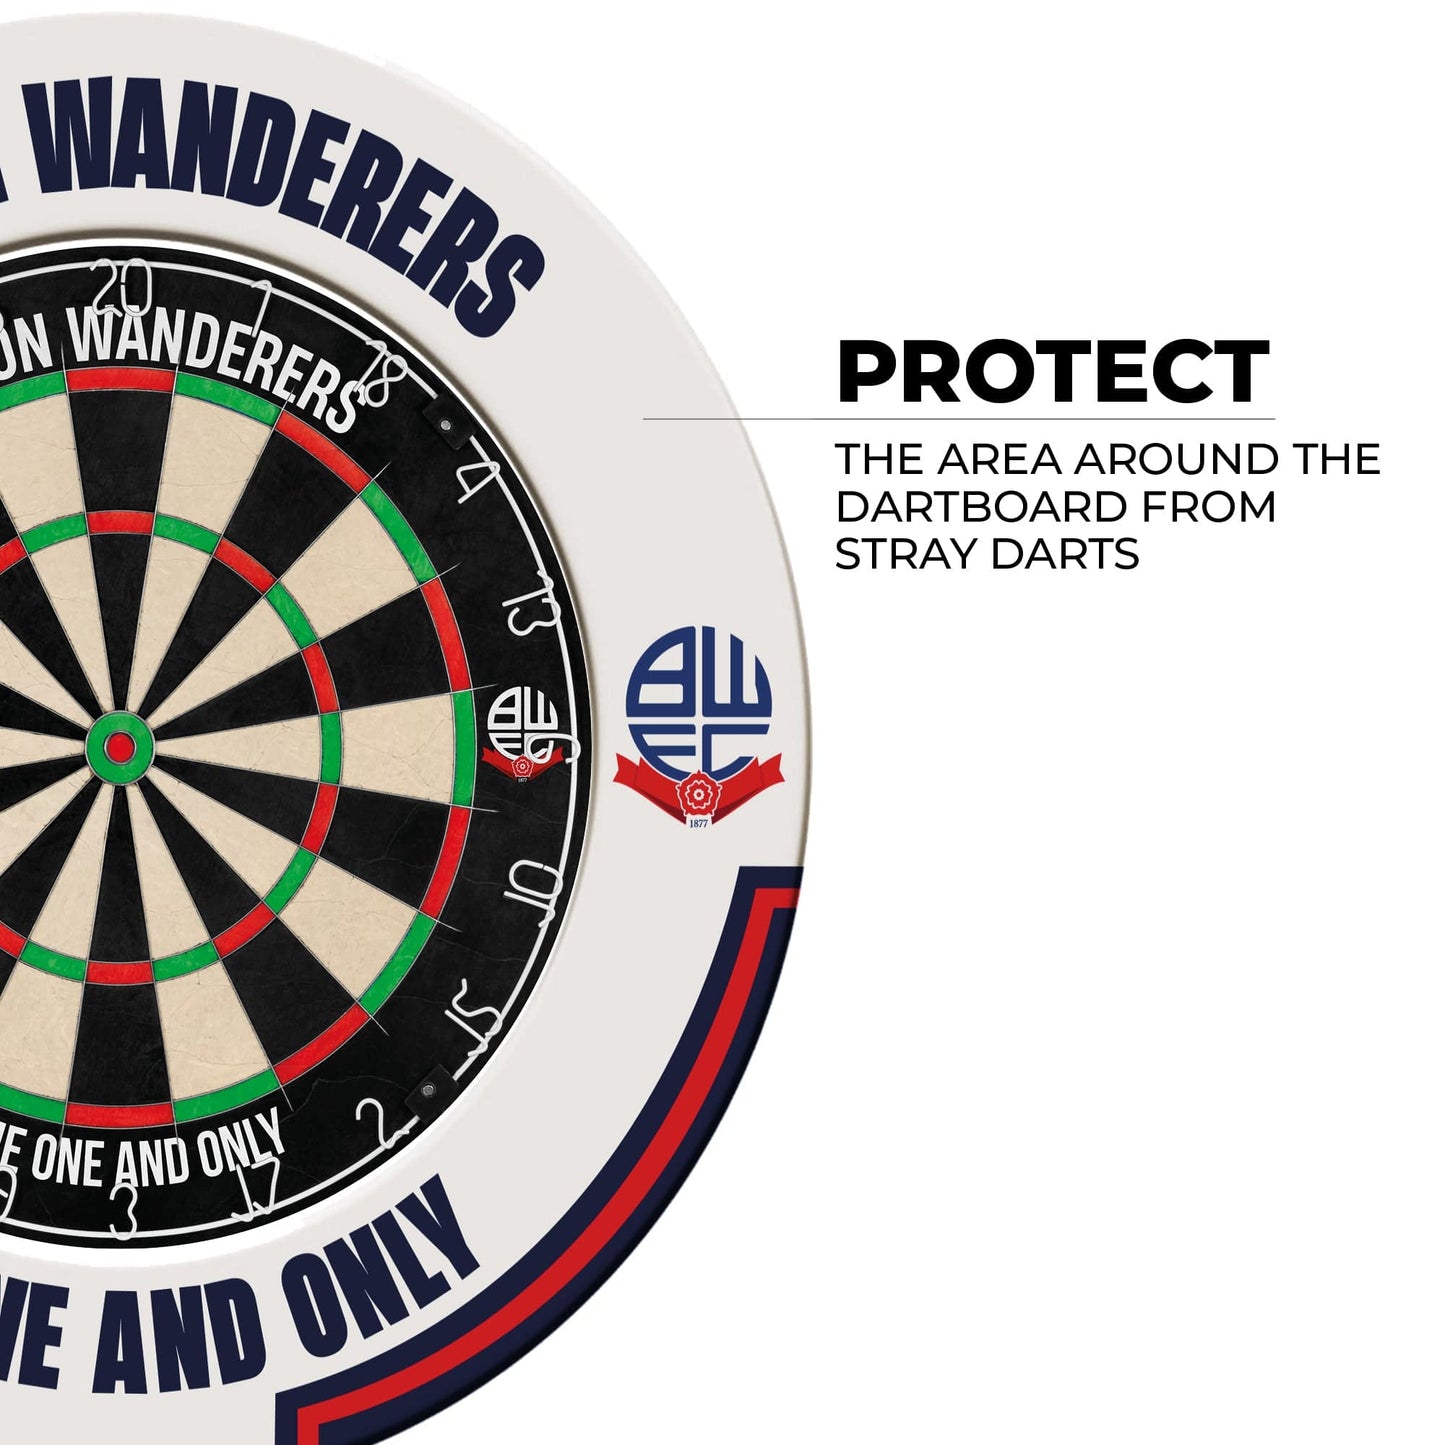 Bolton Wanderers Dartboard Surround - Official Licensed - BWFC - S1 - White - The One and Only